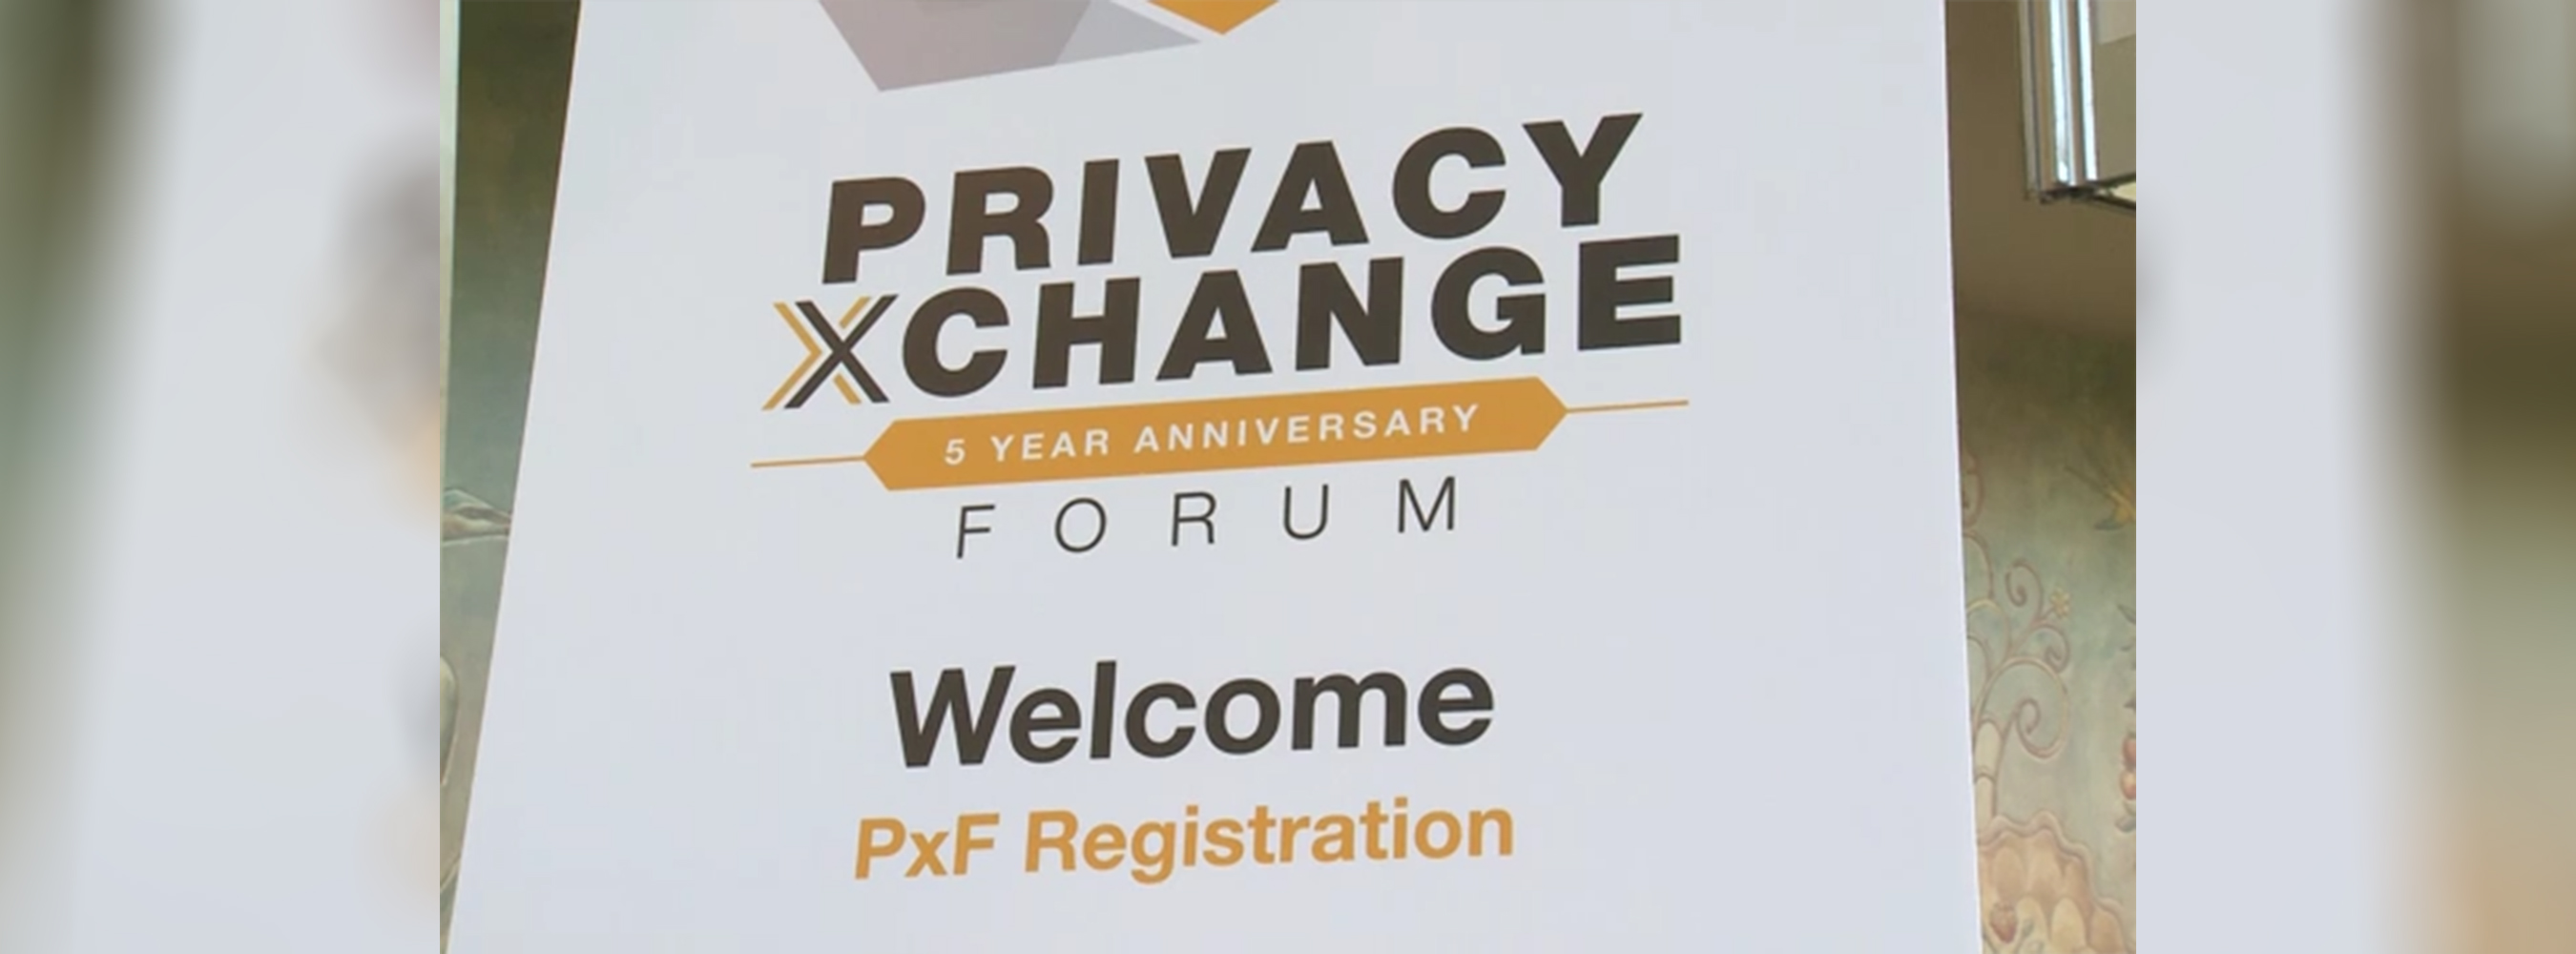 CyberScout Founder Adam Levin, Former US Attorney Preet Bharara and Counter-Terrorism Expert Malcolm Nance Discuss the Equifax Breach, Russian Hacking US Election and the Need for a Cybersecurity Wake Up Call at This Year's Privacy XChange Forum